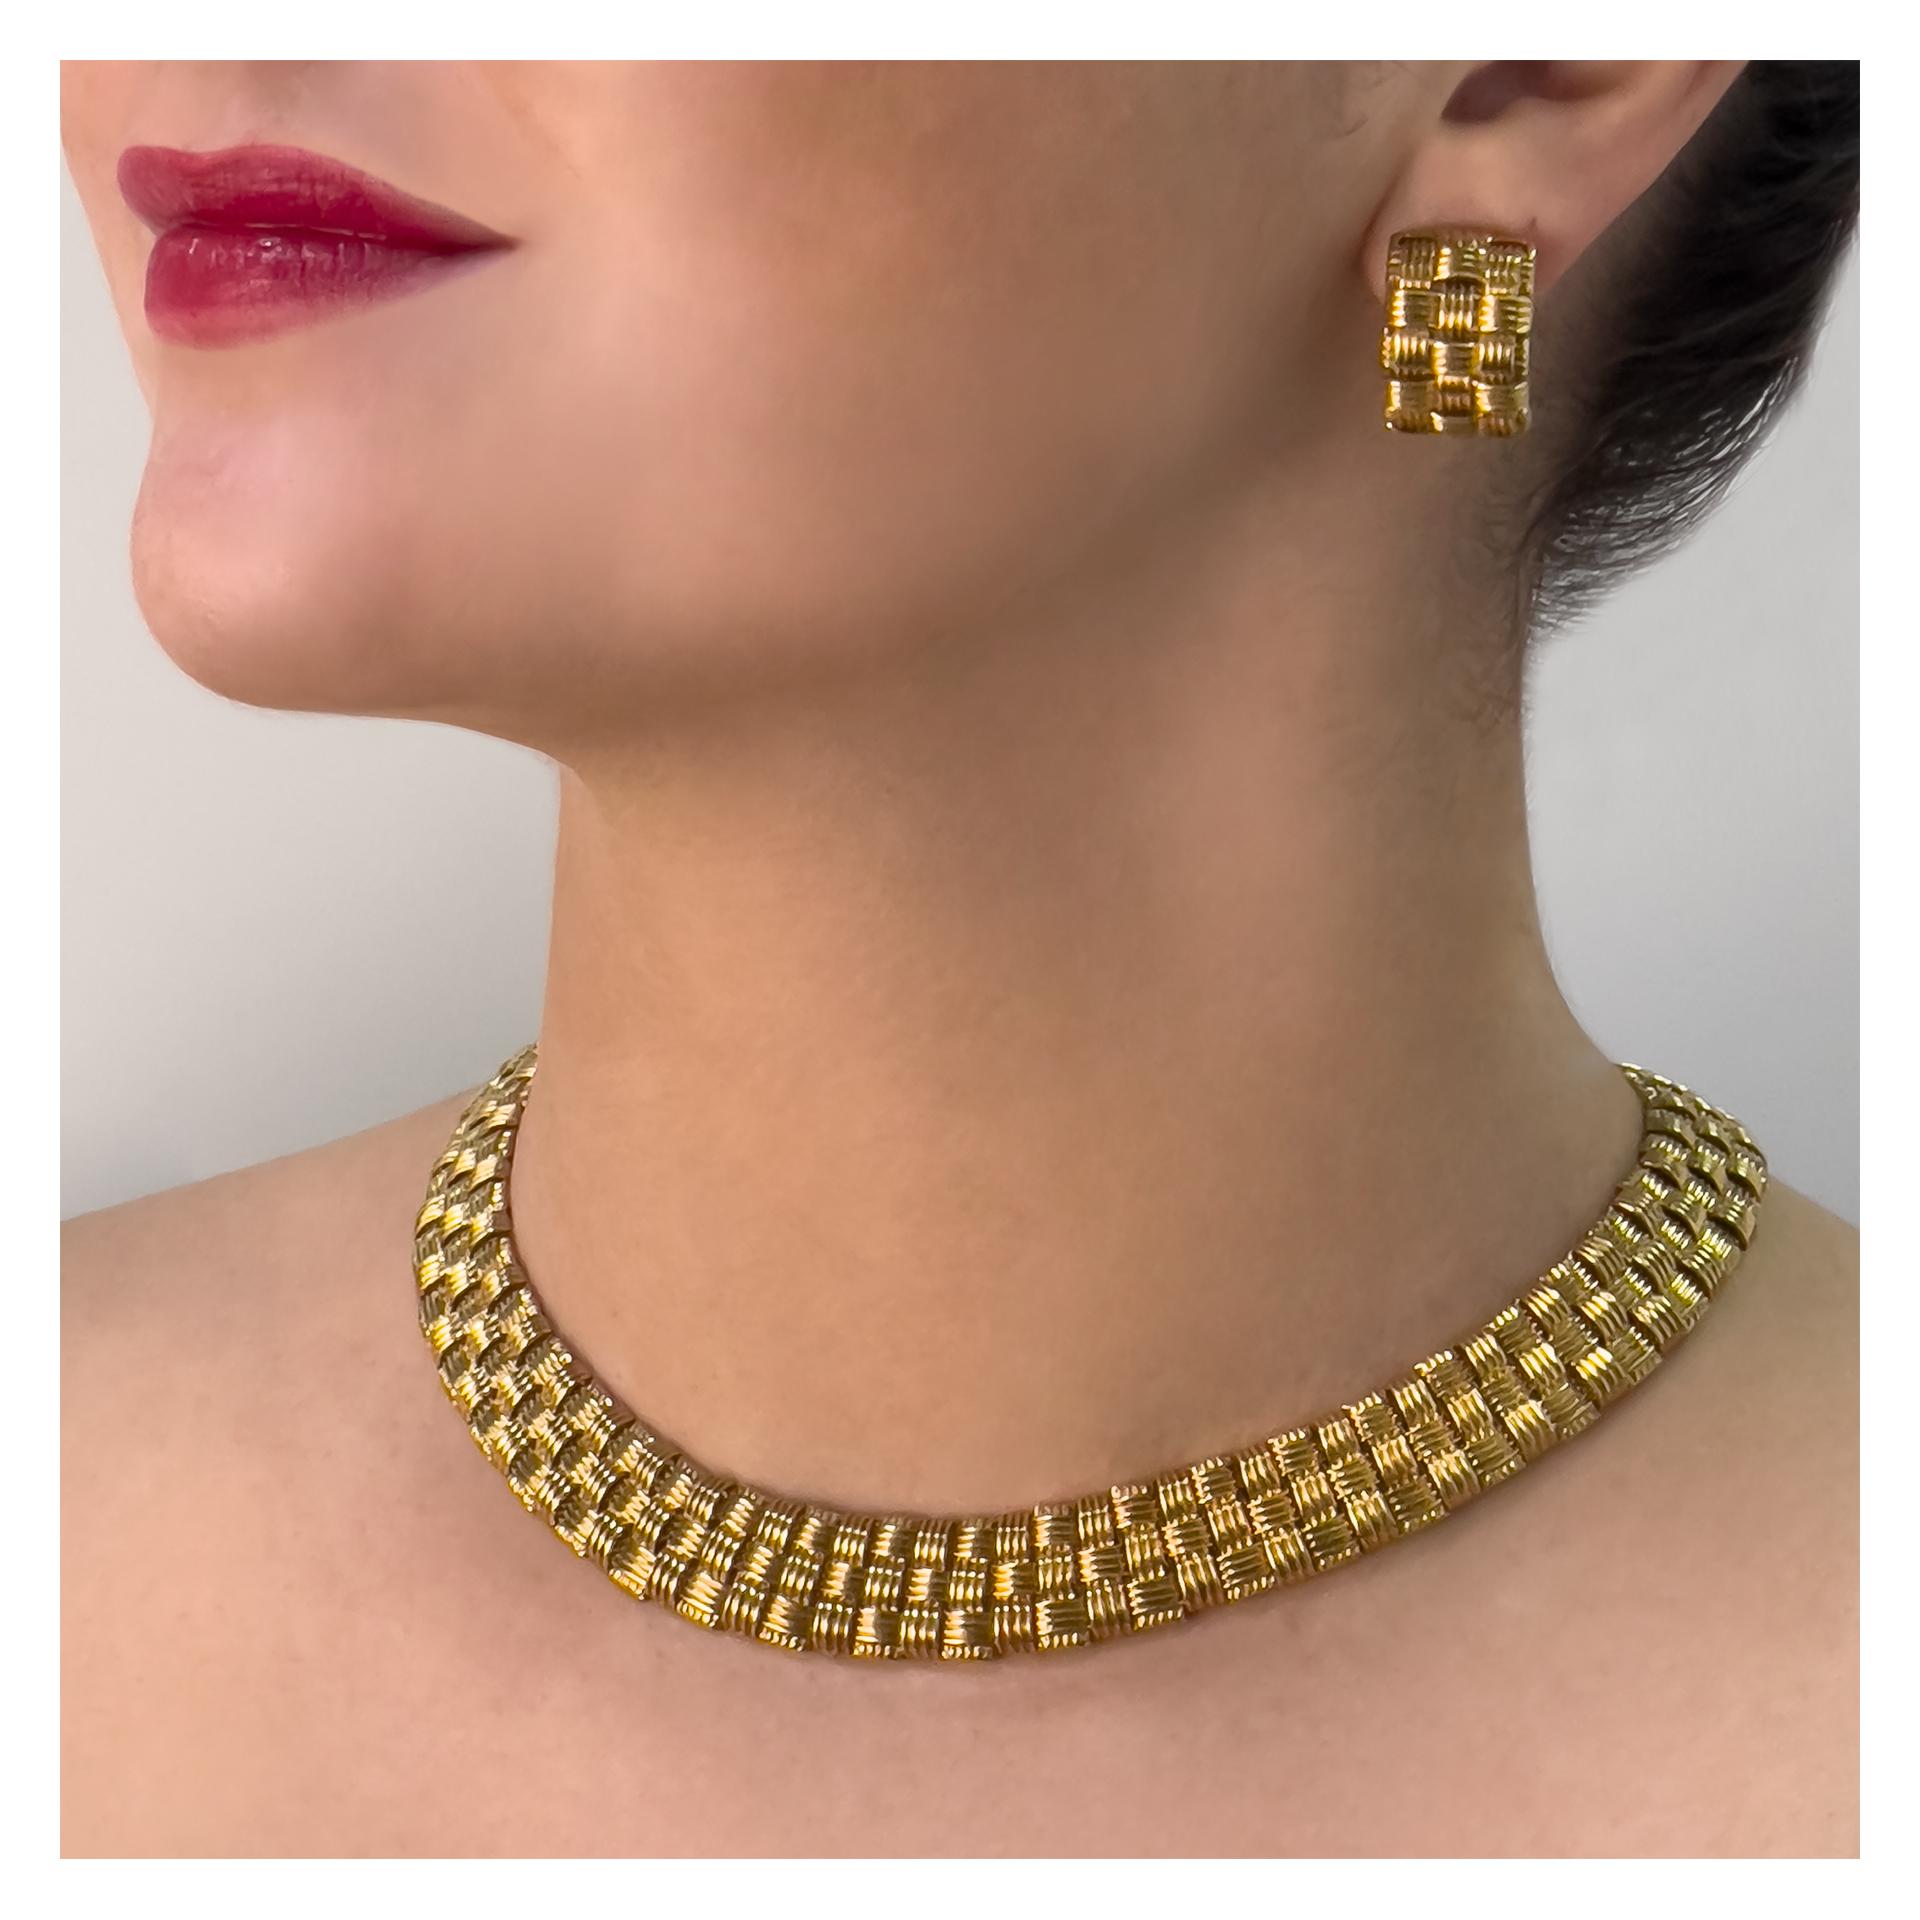 Roberto Coin Appassionata earring and necklace set in 18k yellow gold. Necklace length is 16 inches, width is 0.60 inches. Earrings length is 0.90 inches by 0.60 inches wide. Approximately 0.20 carats in F-G color, VVS-VS clarity diamonds in the